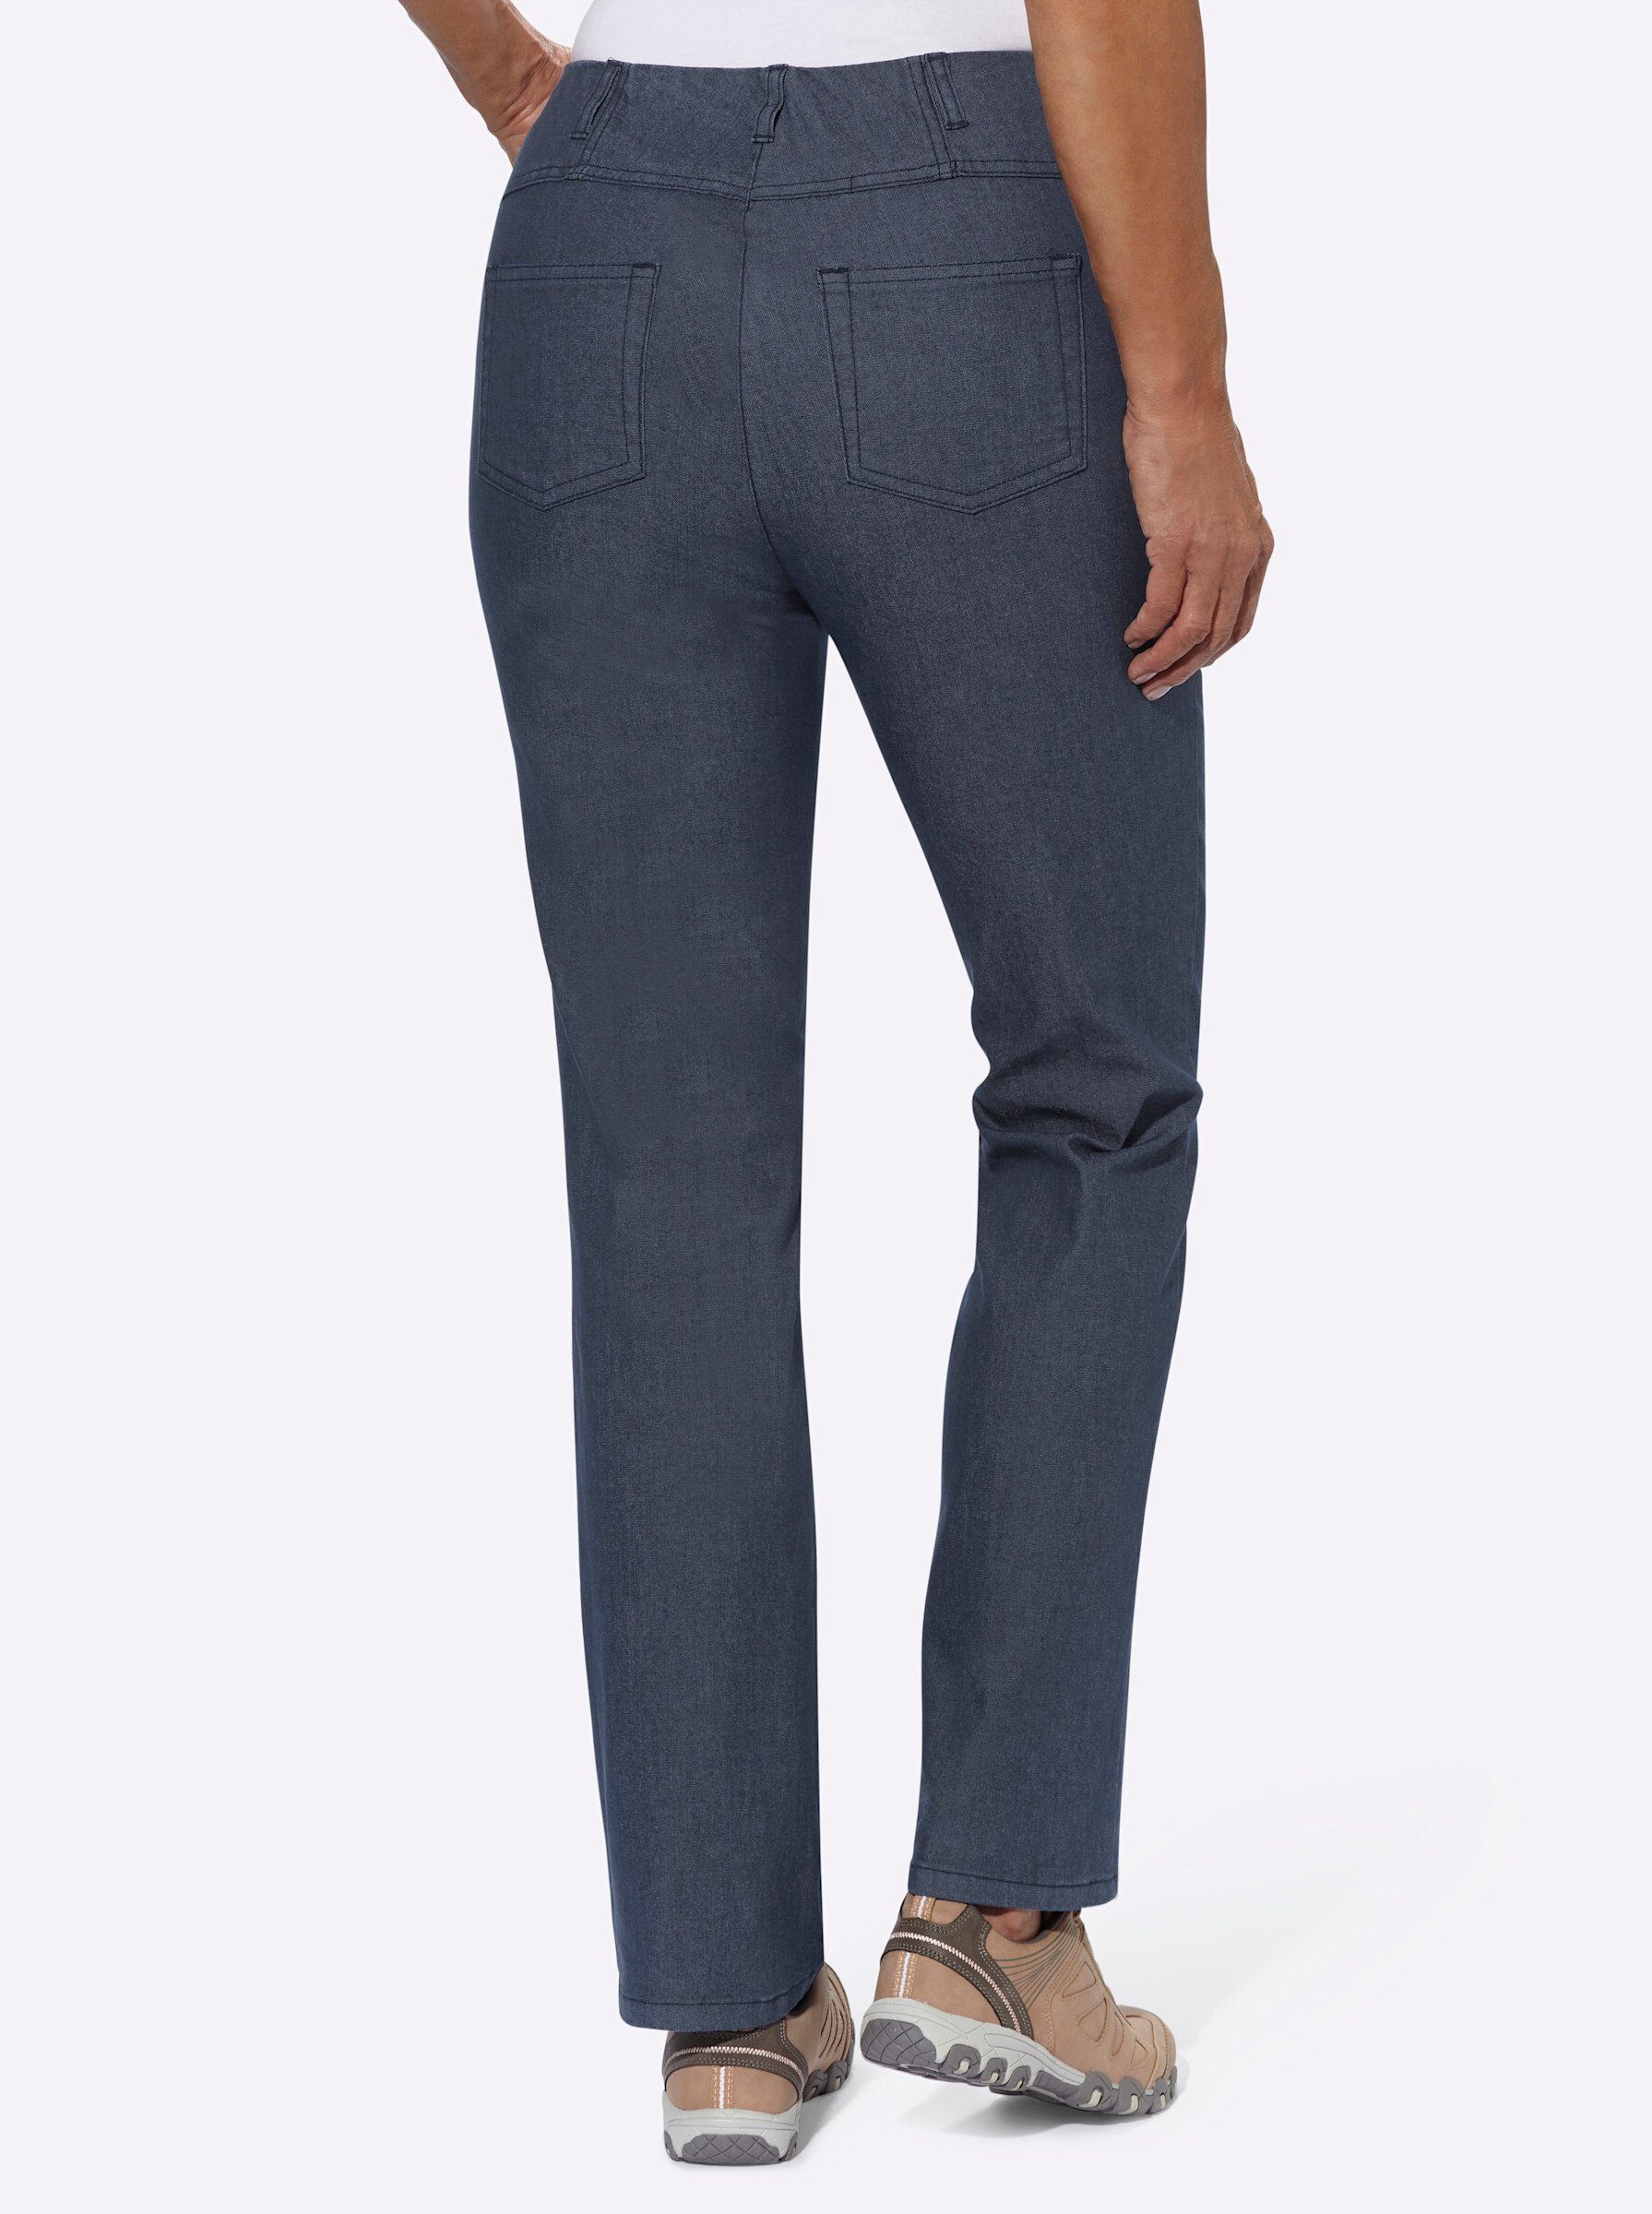 Cosma Bequeme Jeans blue-stone-washed